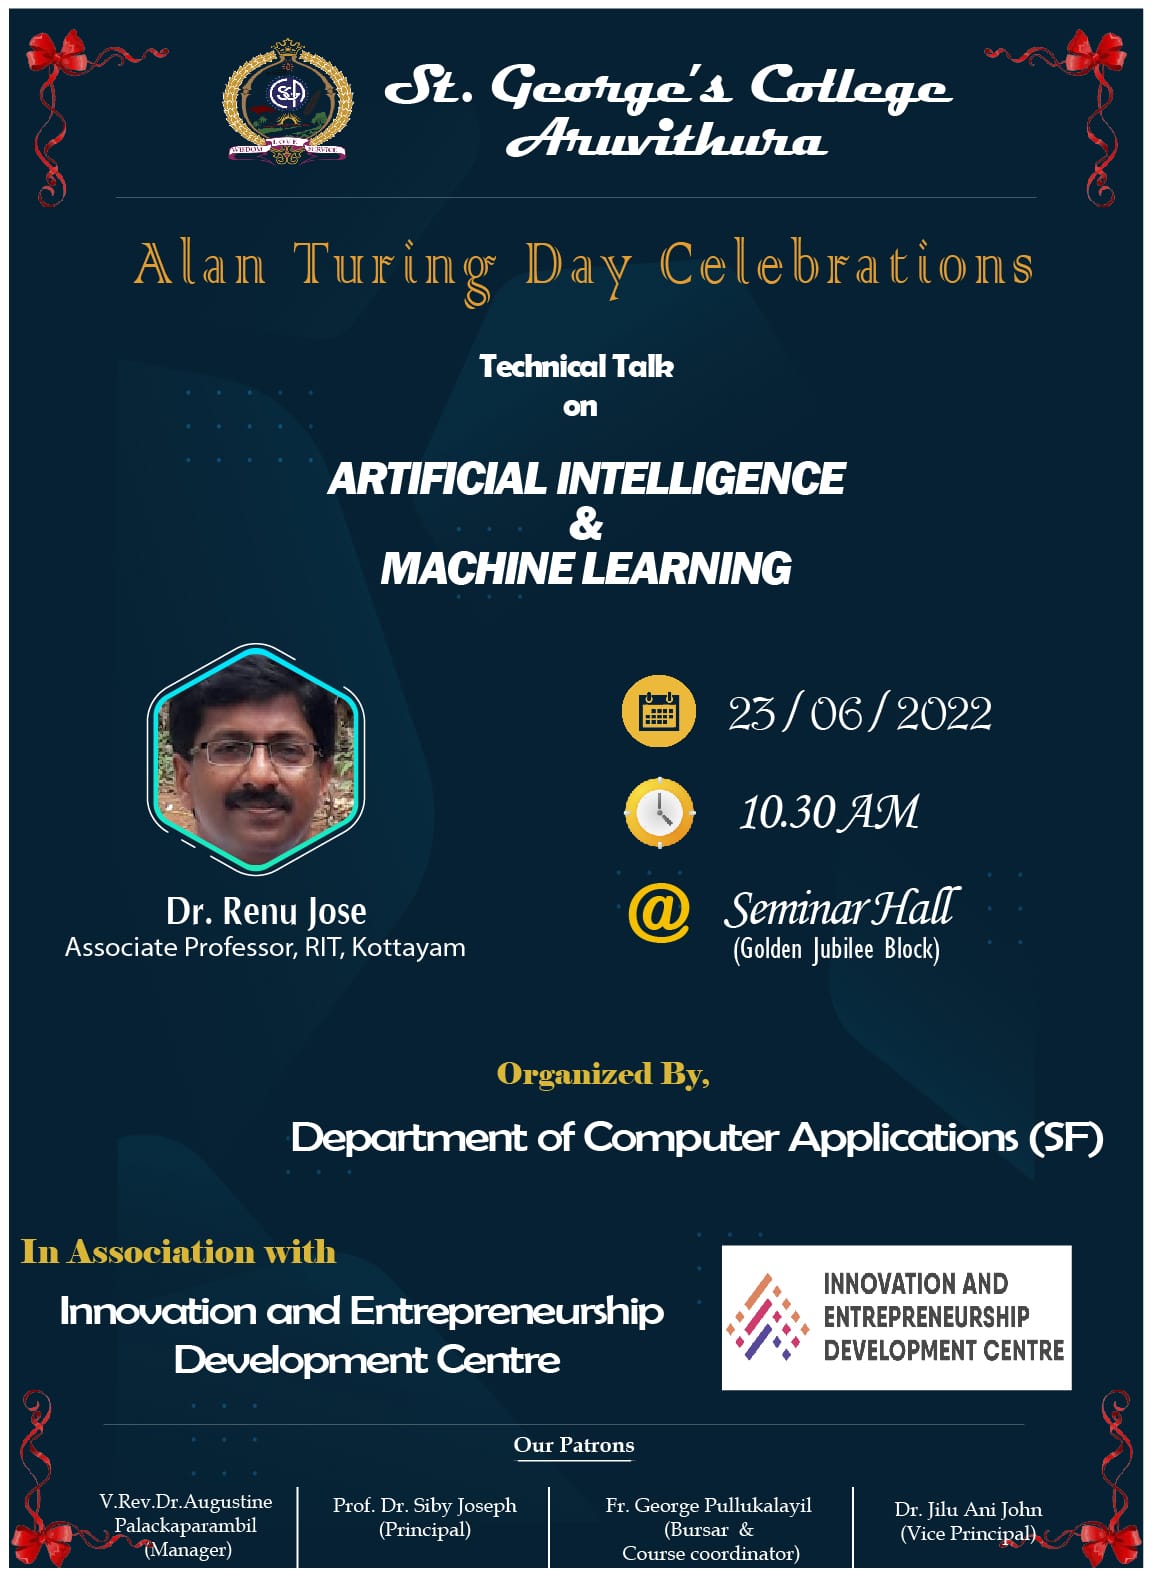 Artificial Intelligence & Machine Learning - Technical Talk